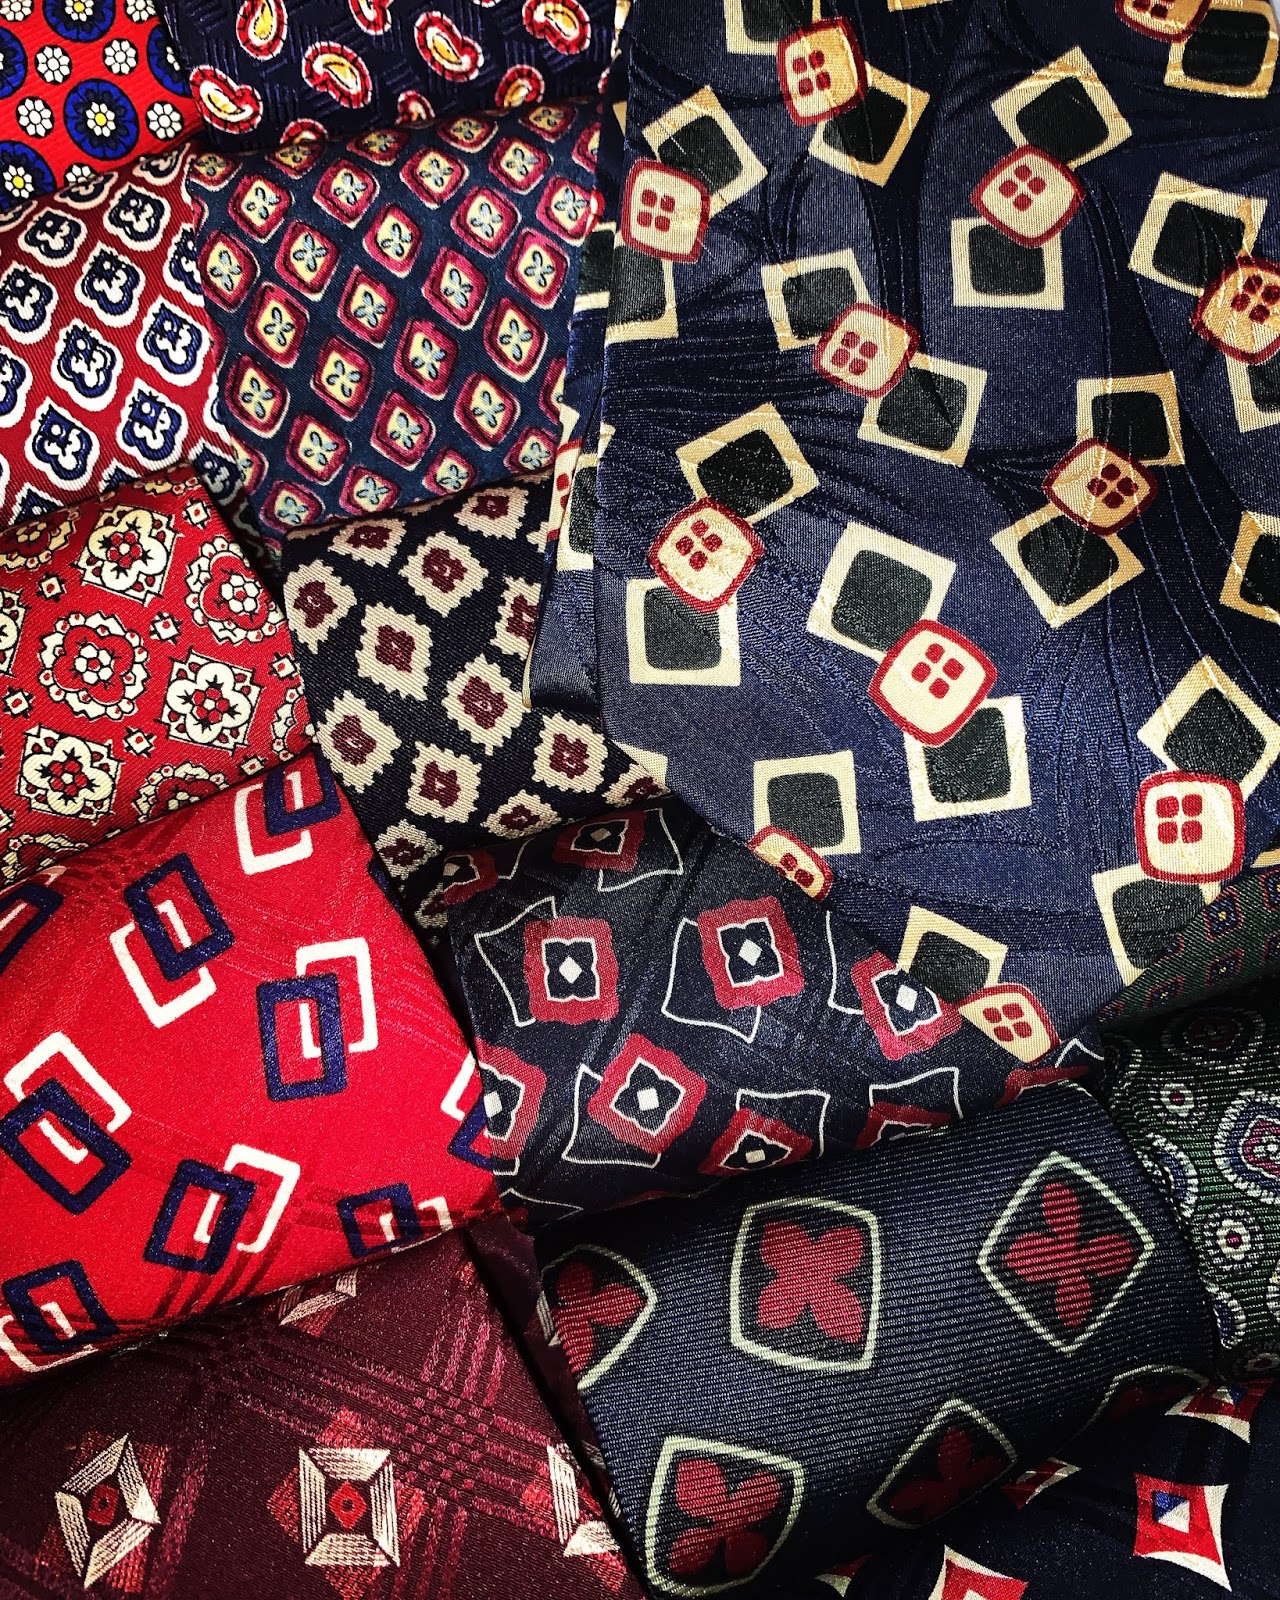 An Uptown Dandy: The Vintage Polo Ralph Lauren Tie Collection